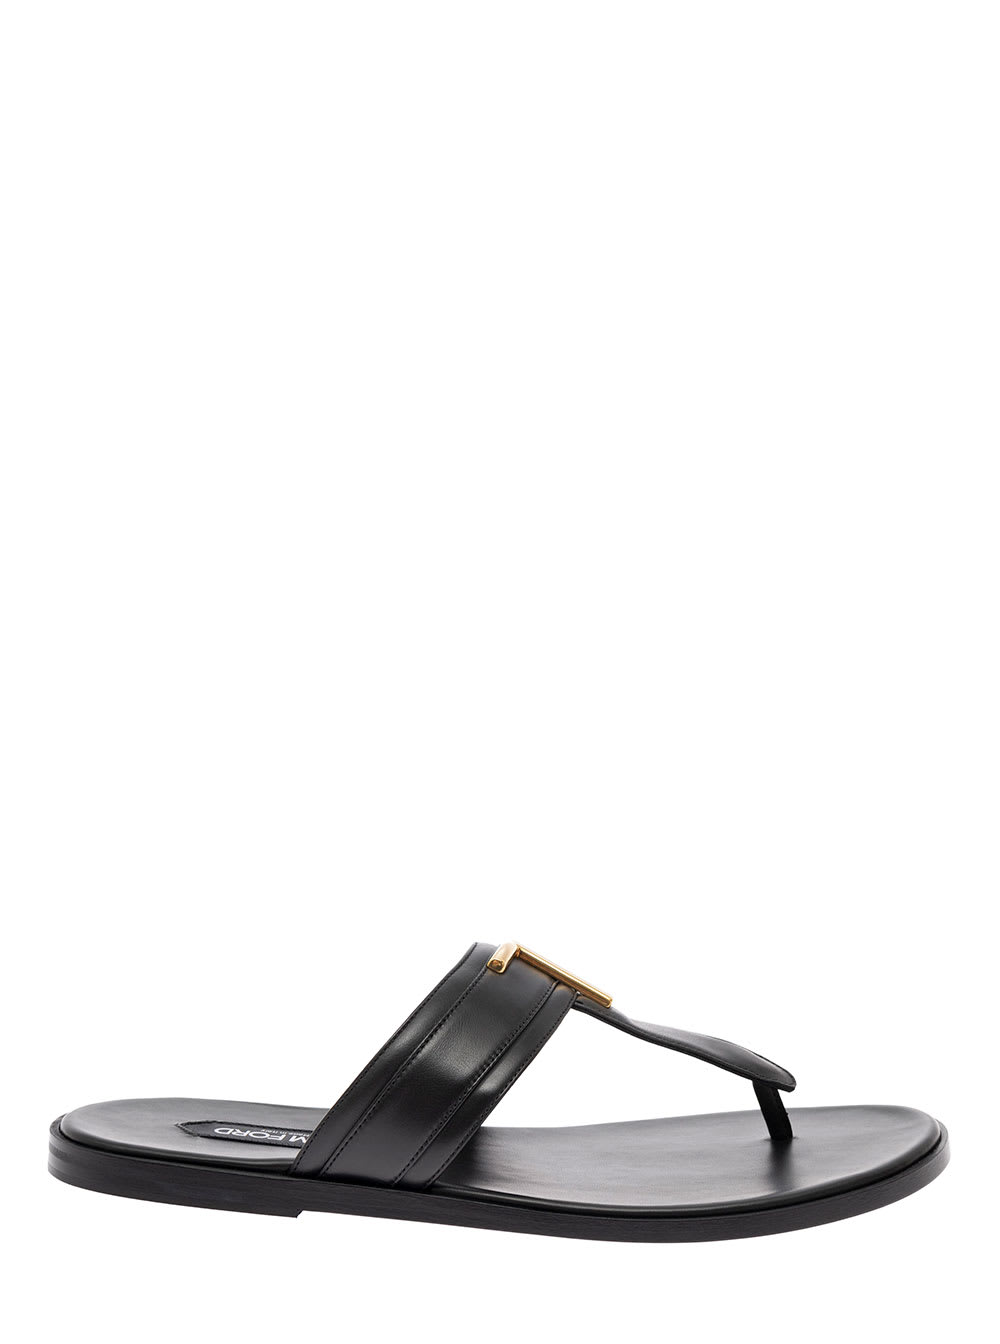 Tom Ford Mans Black Leather Sandals With Metal Logo